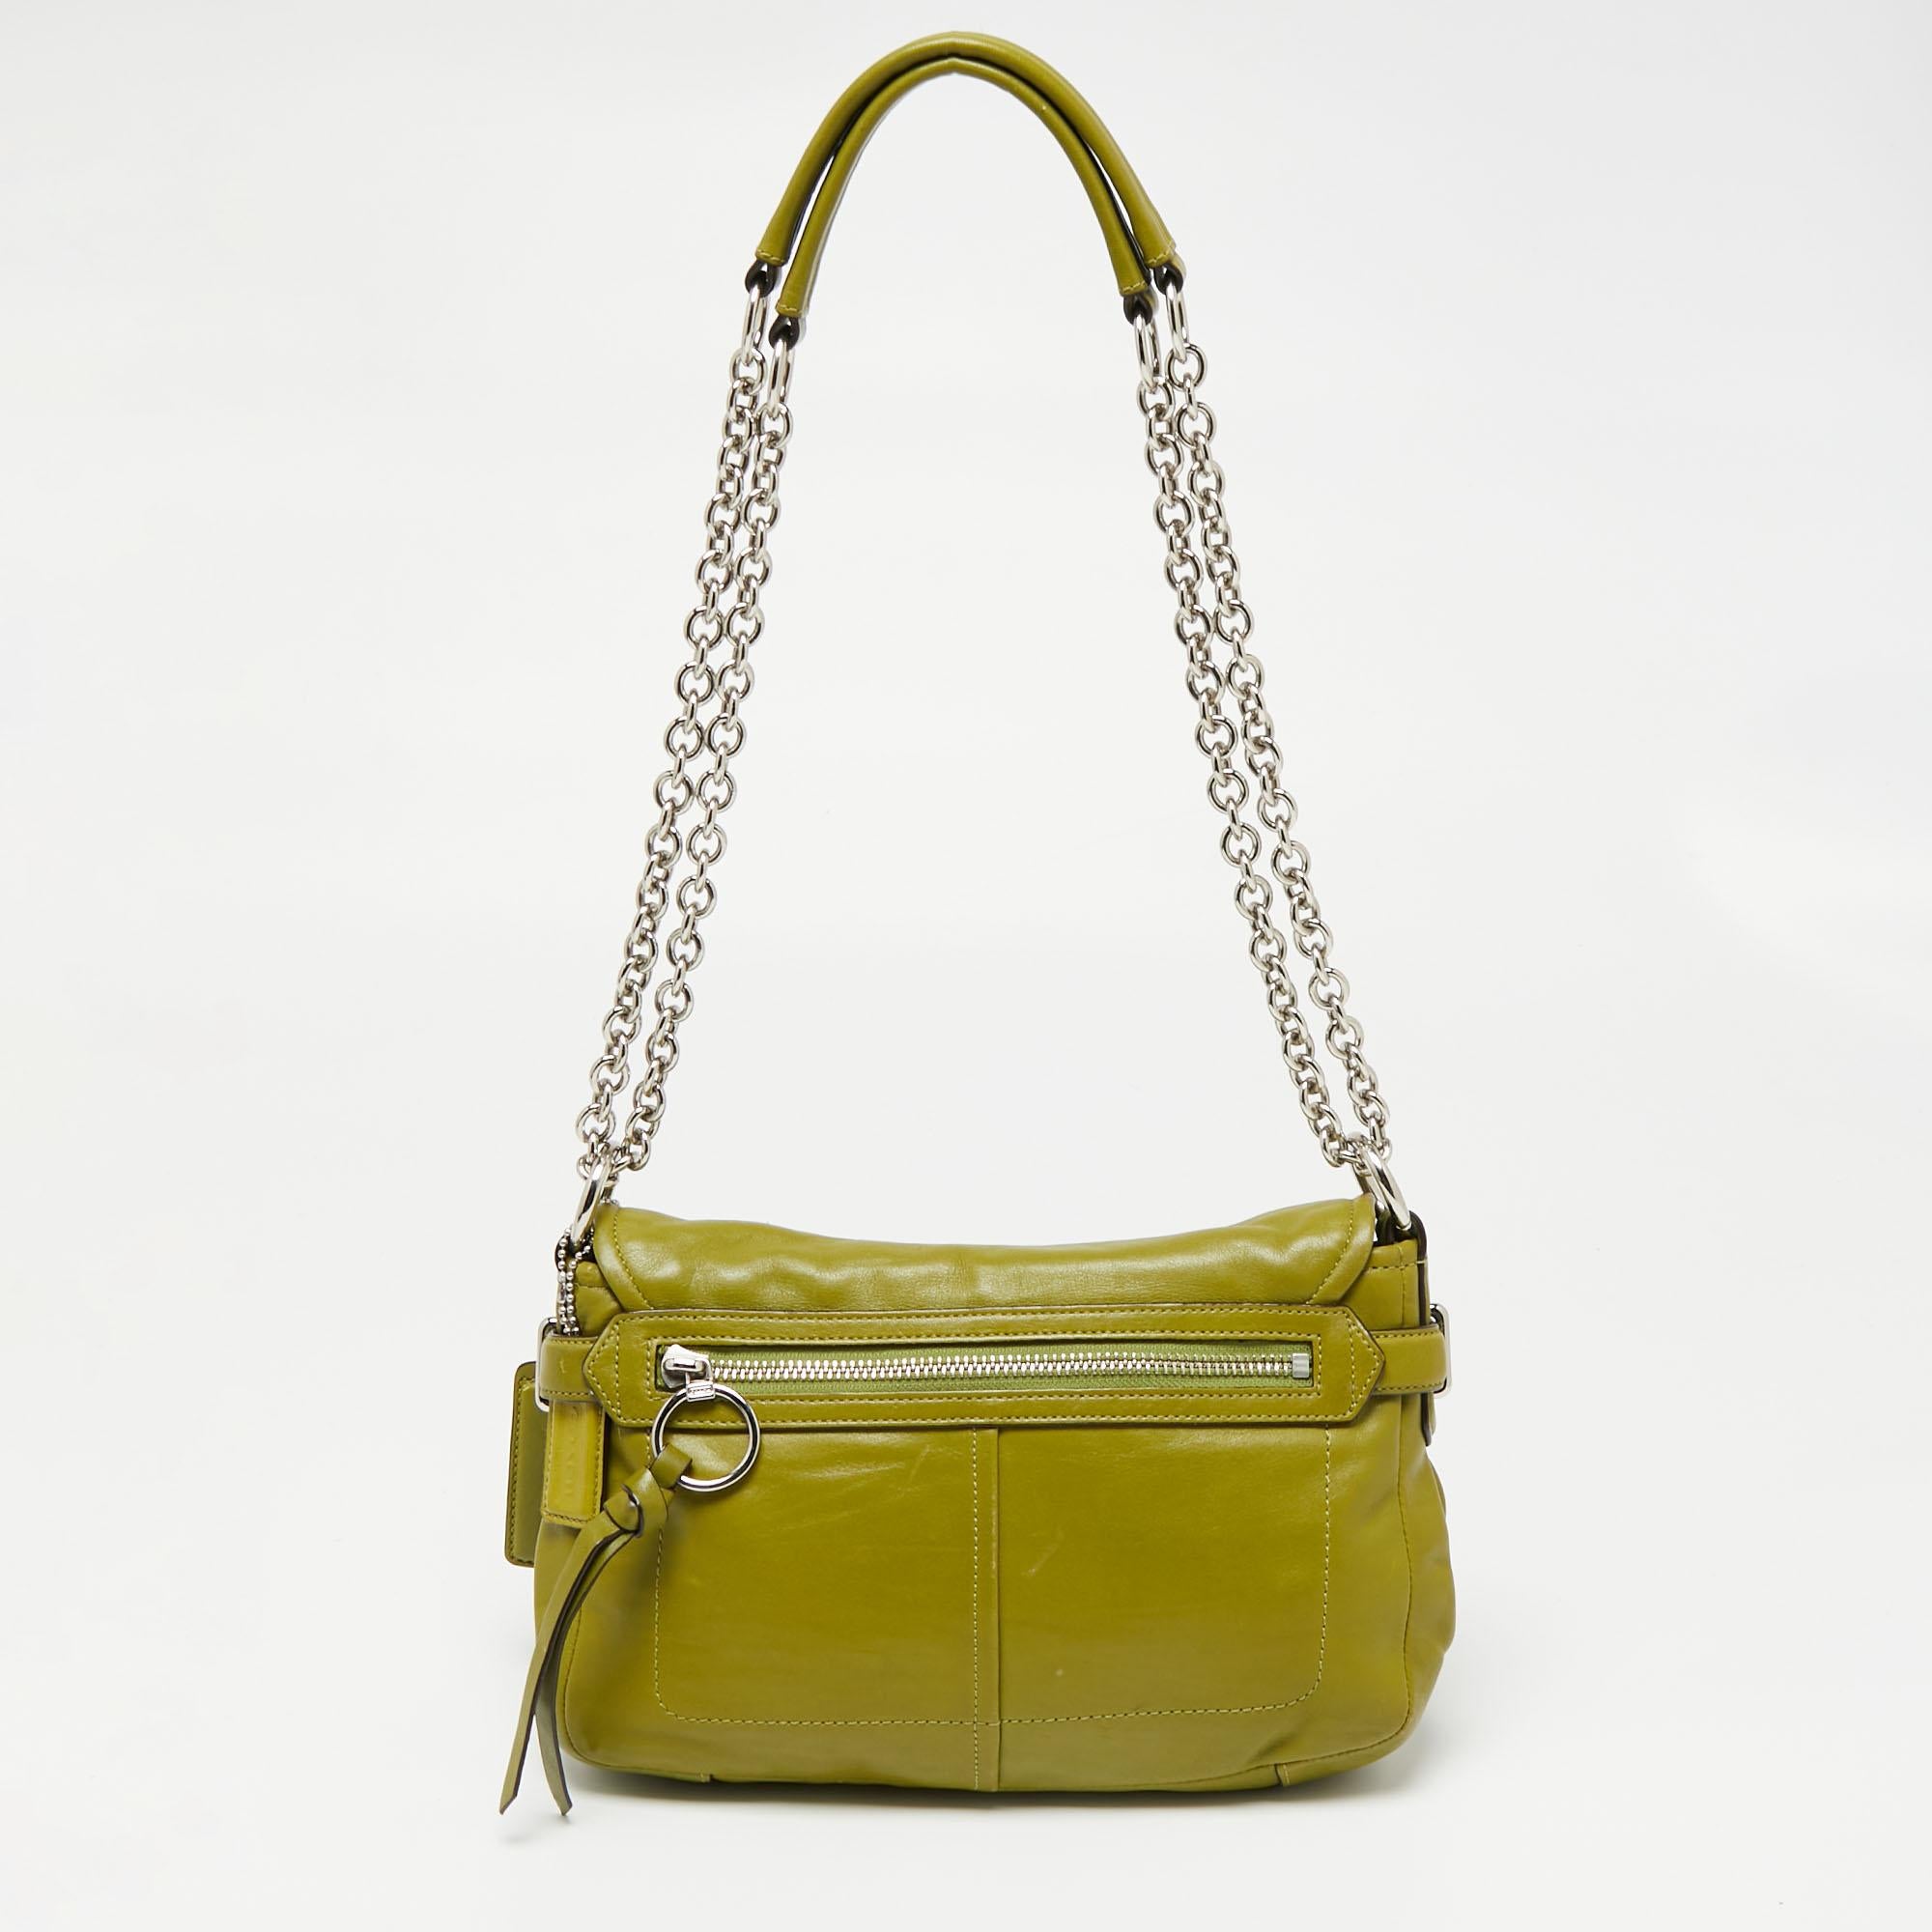 This functional flap bag by Coach is crafted from green leather. It comes with a sliding shoulder handle and a satin-lined interior. The bag is highlighted by a silver-tone lock on the flap.

Includes: Info Card
